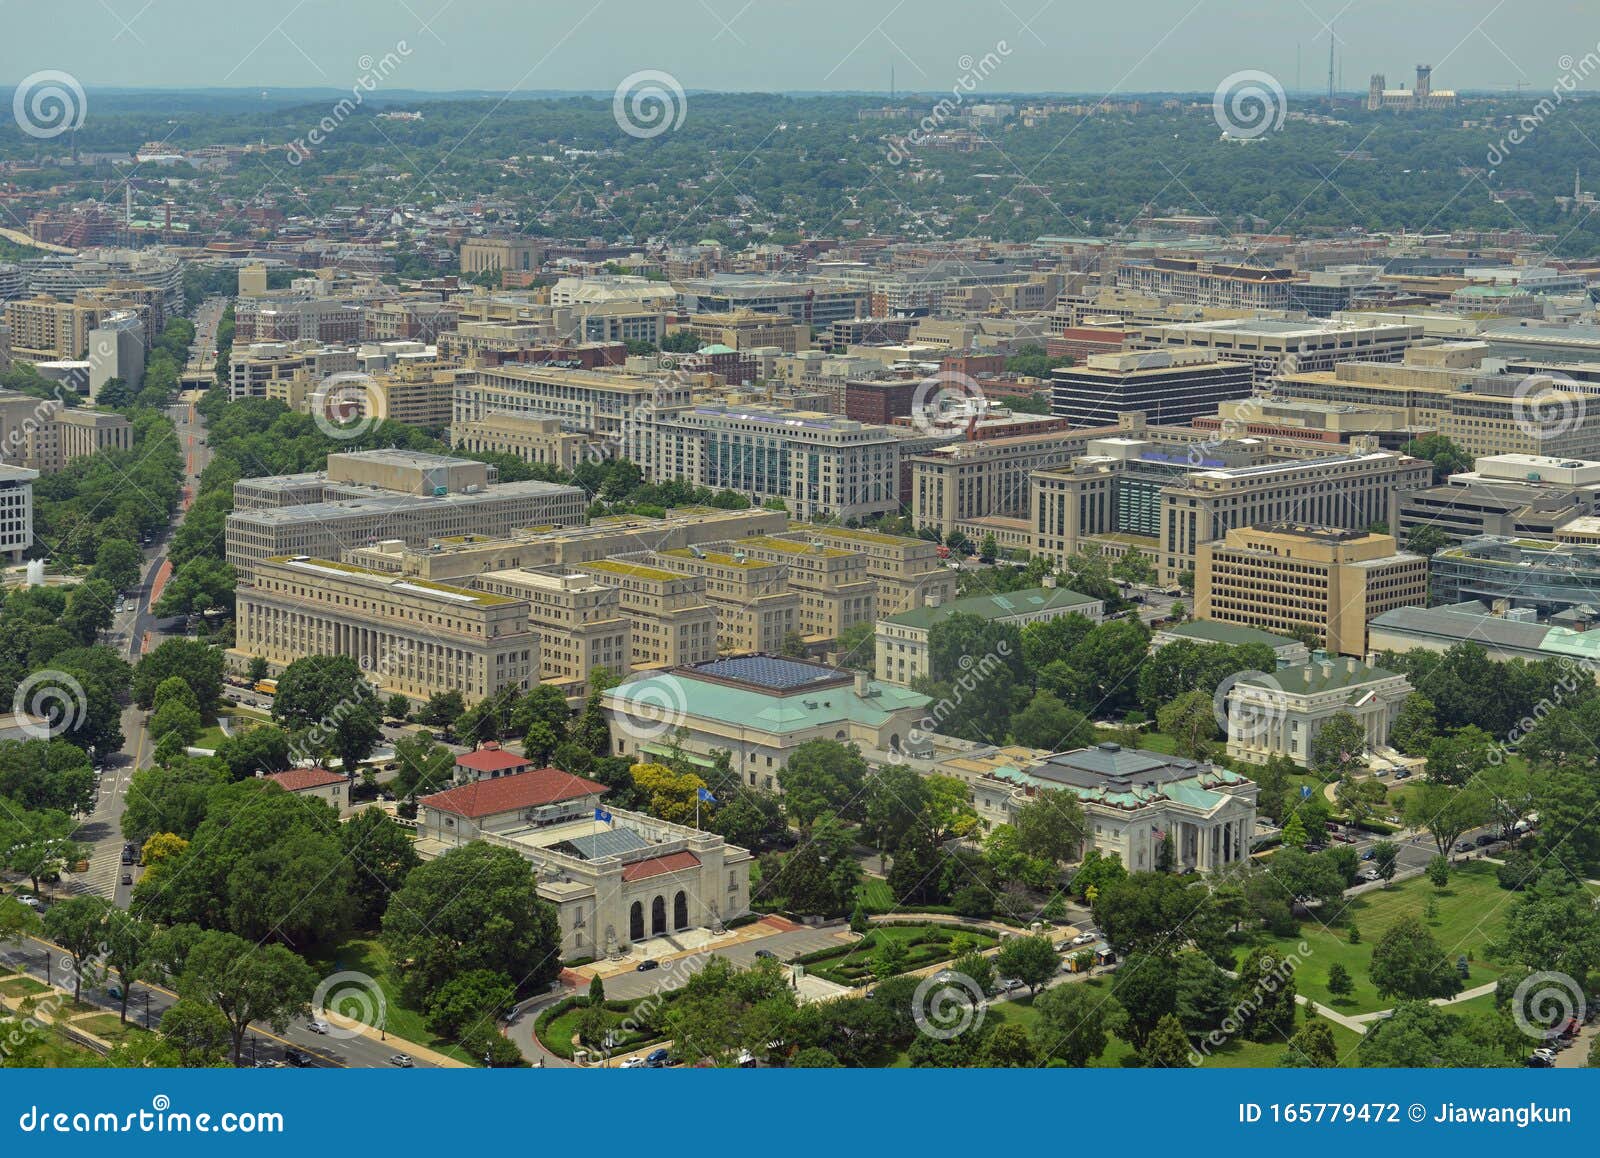 us department of interior building in washington dc, usa